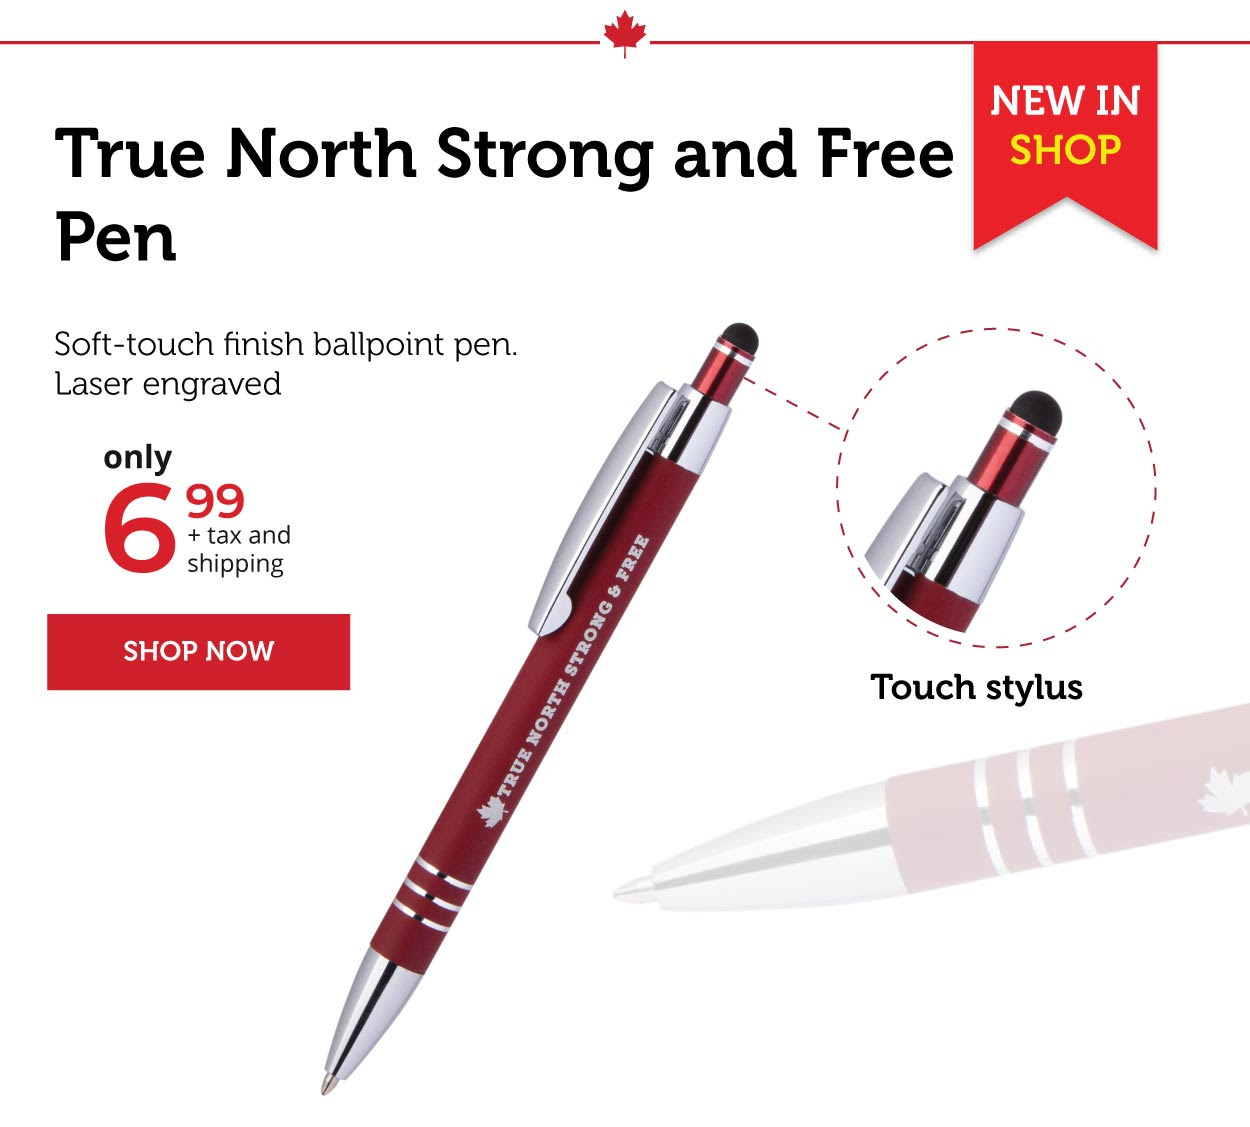 True North Strong and Free Pen